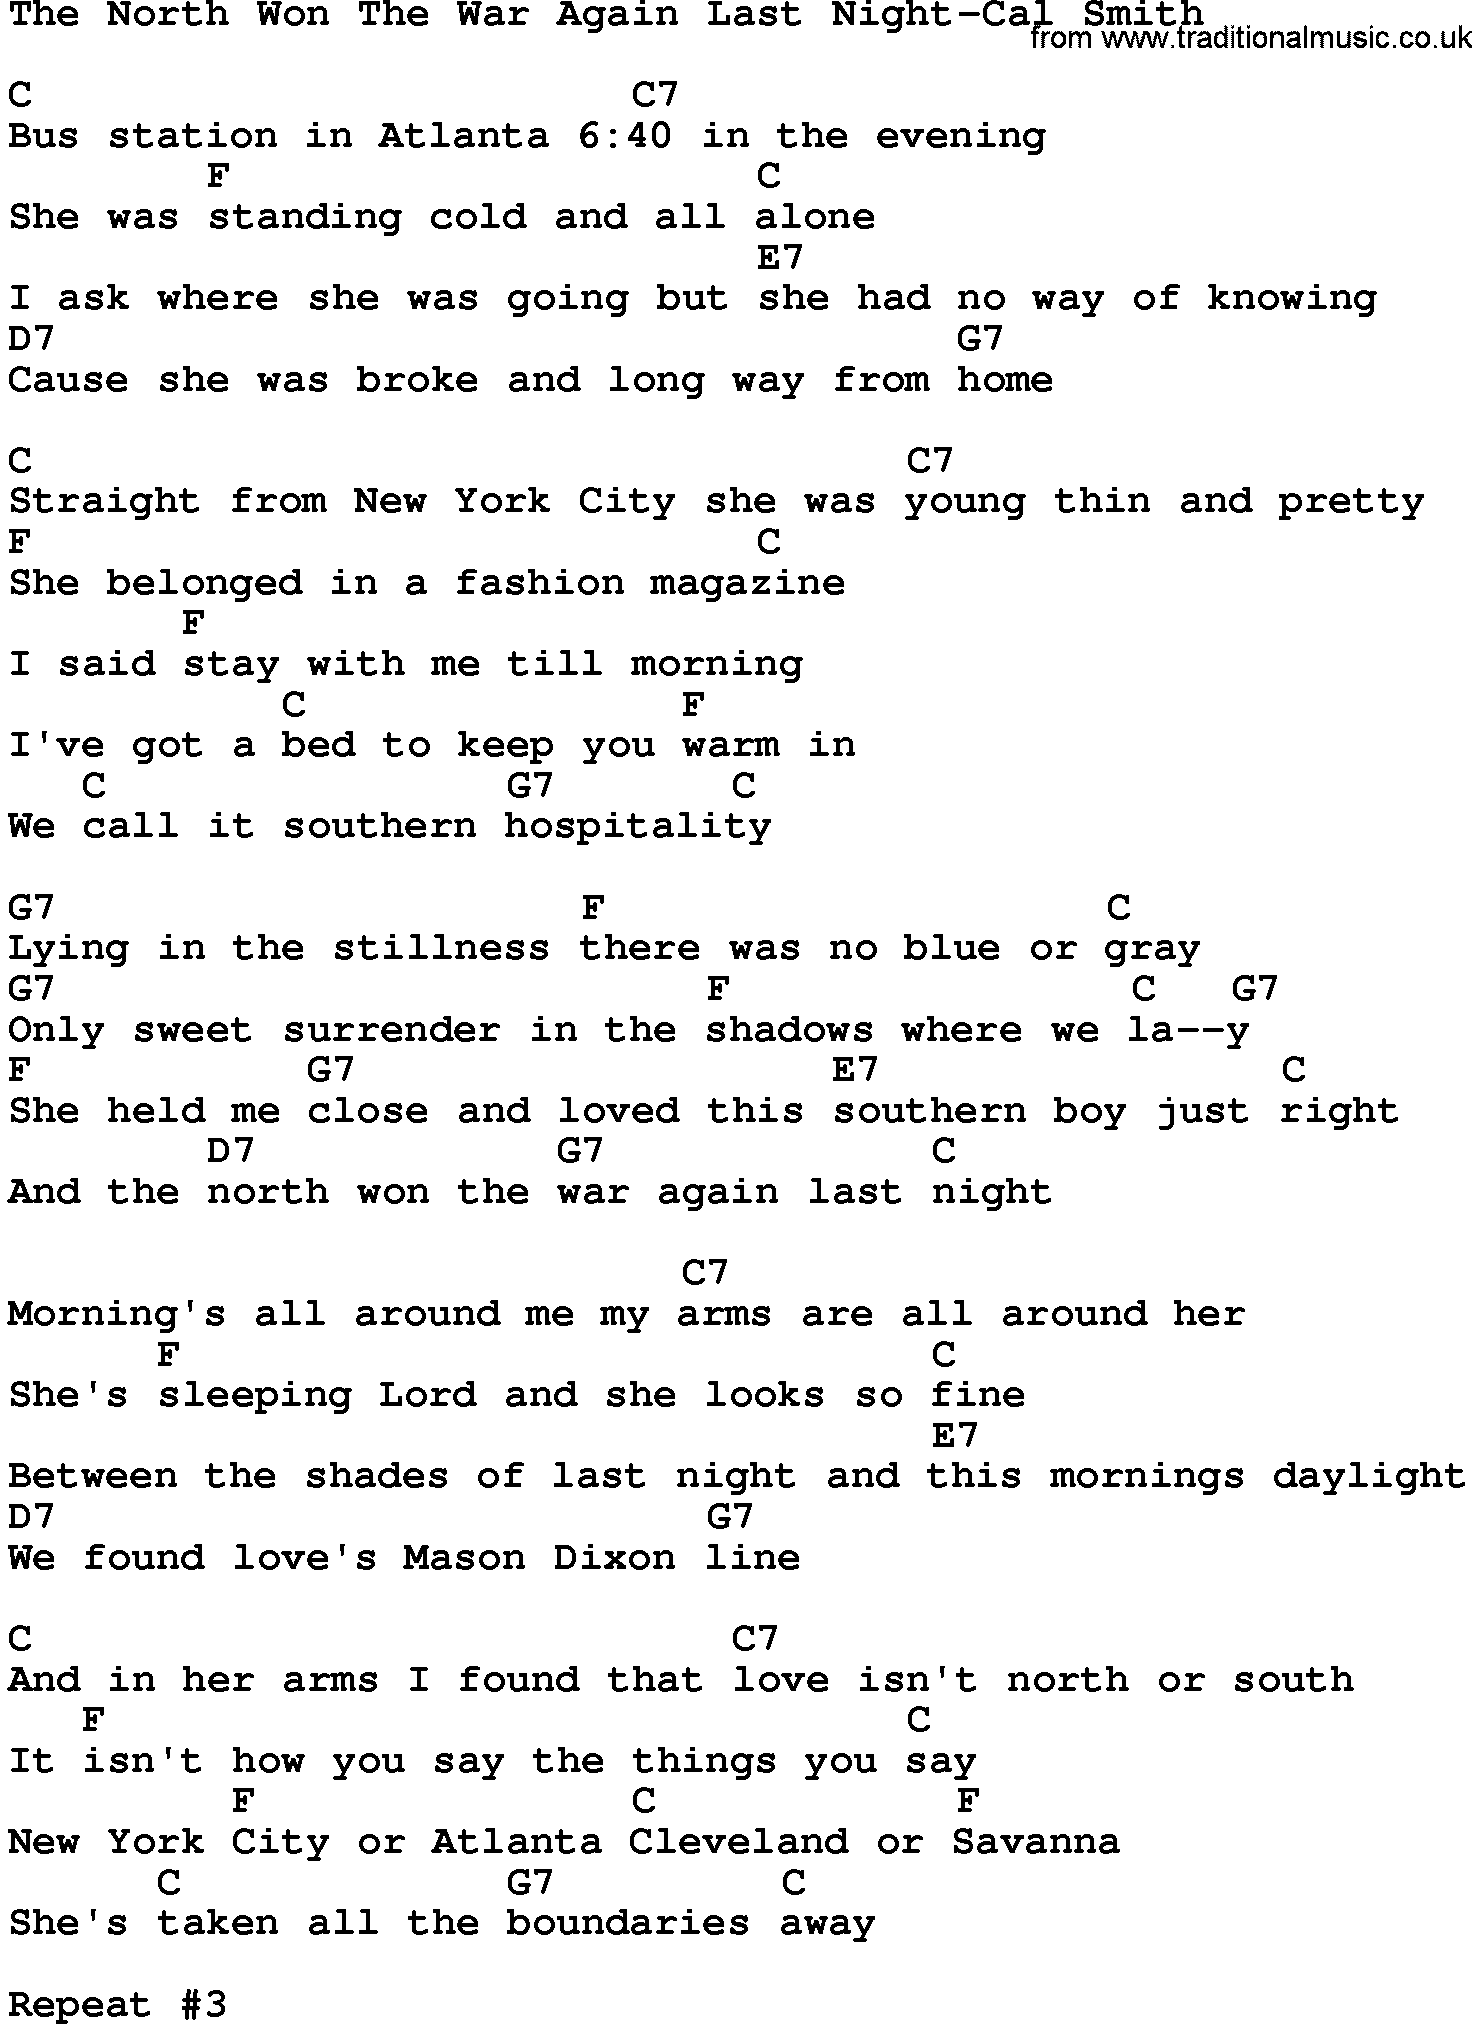 Country music song: The North Won The War Again Last Night-Cal Smith lyrics and chords